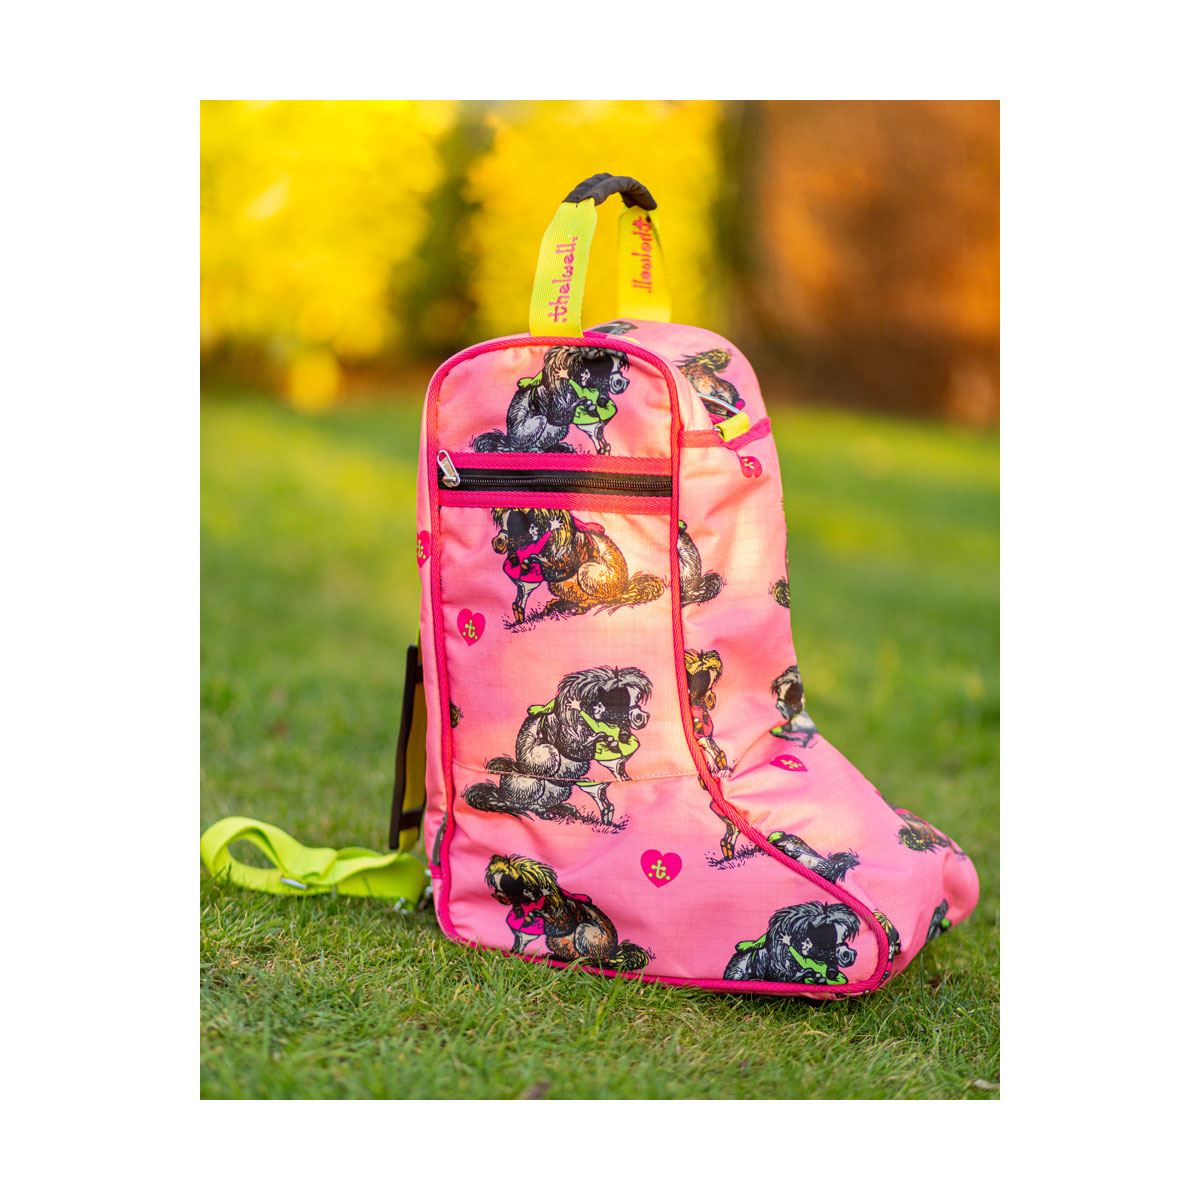 Hy Equestrian Thelwell Collection Hugs Jodhpur Boot Bag - Just Horse Riders